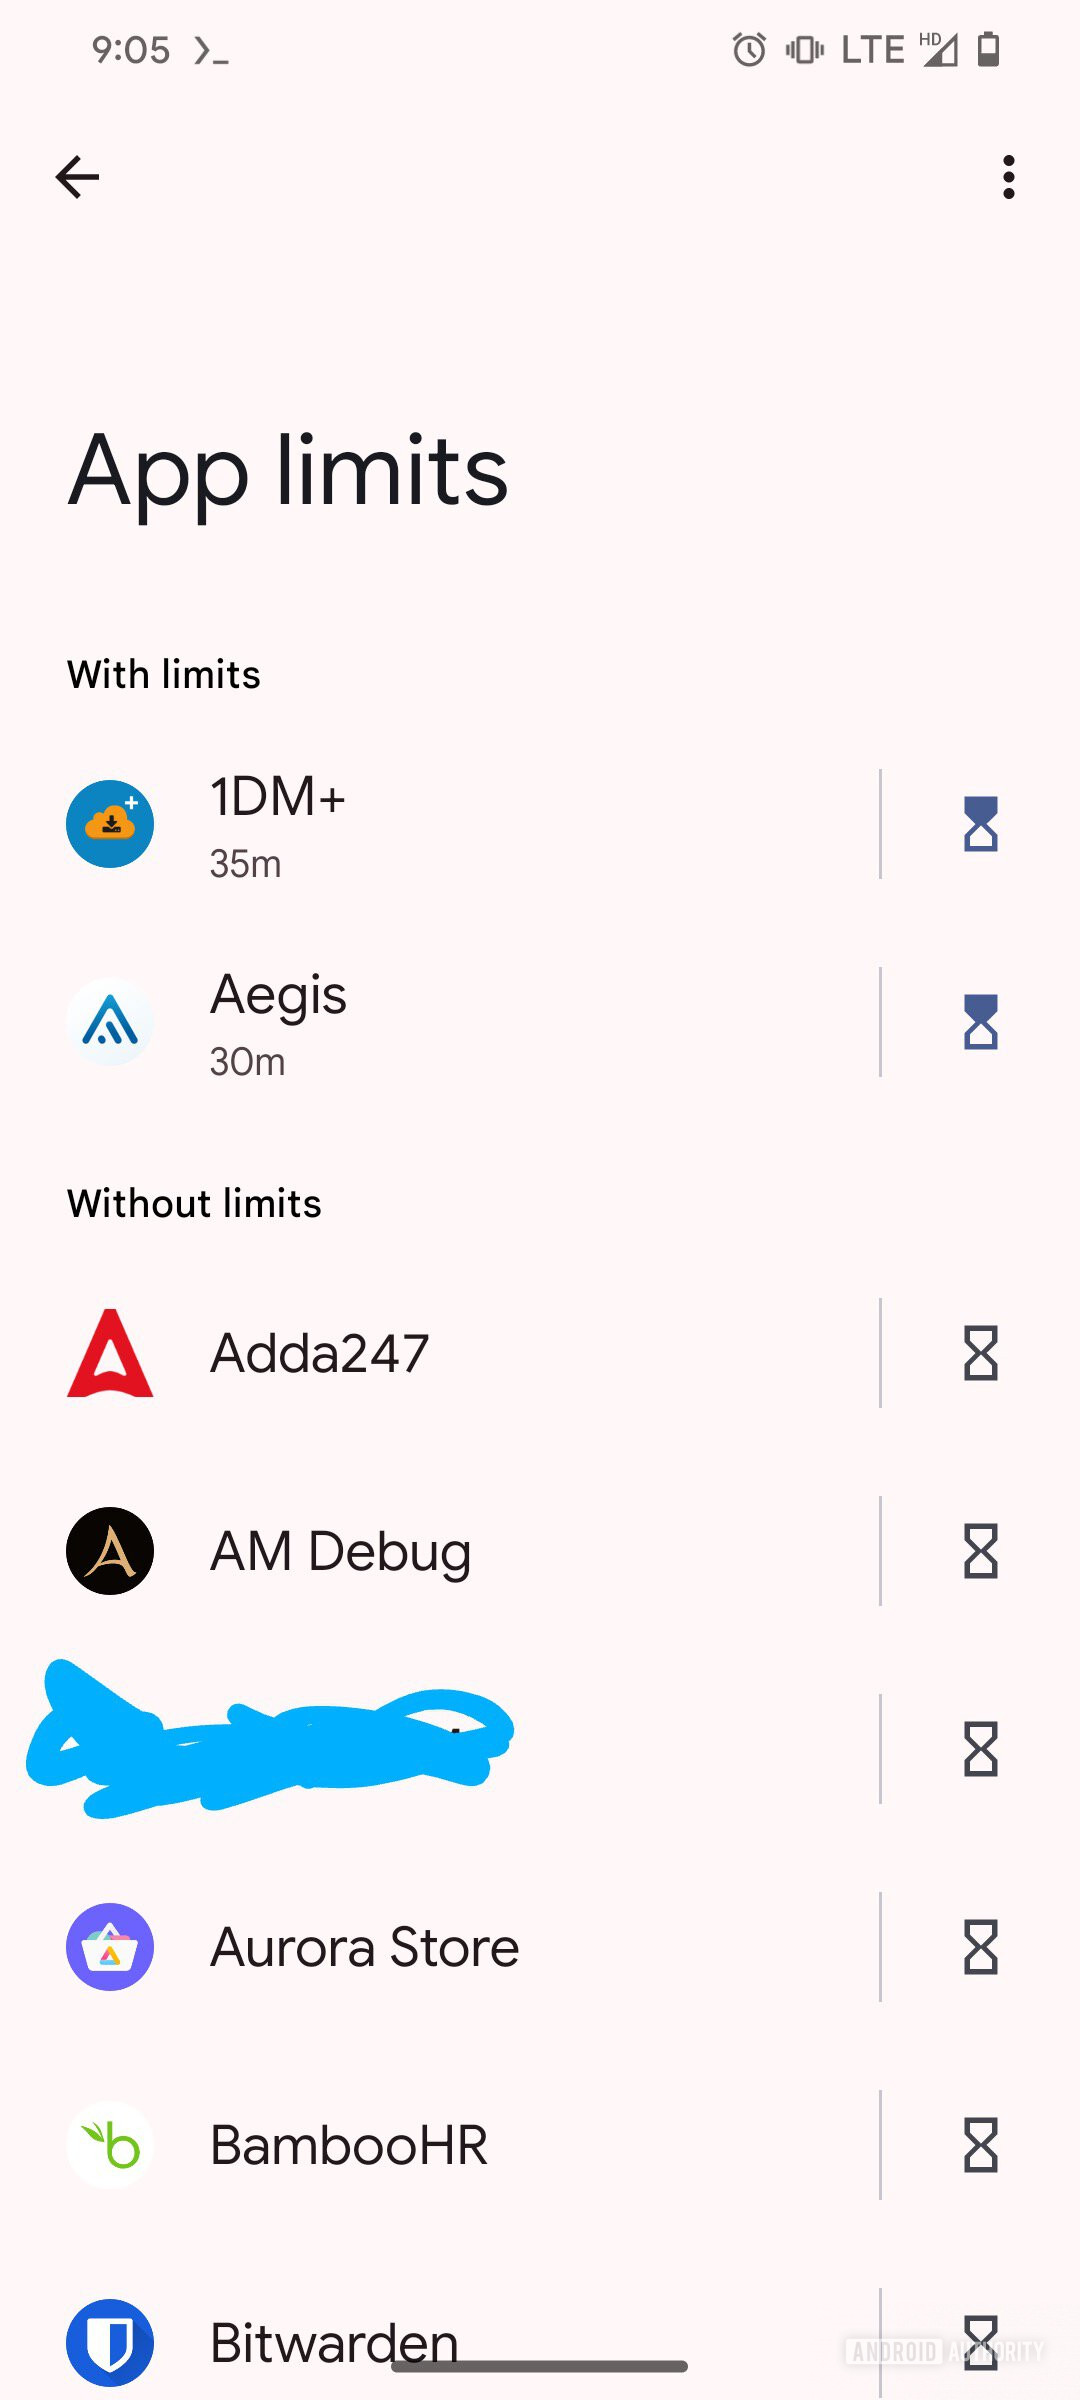 Digital Wellbeing new app limits sections